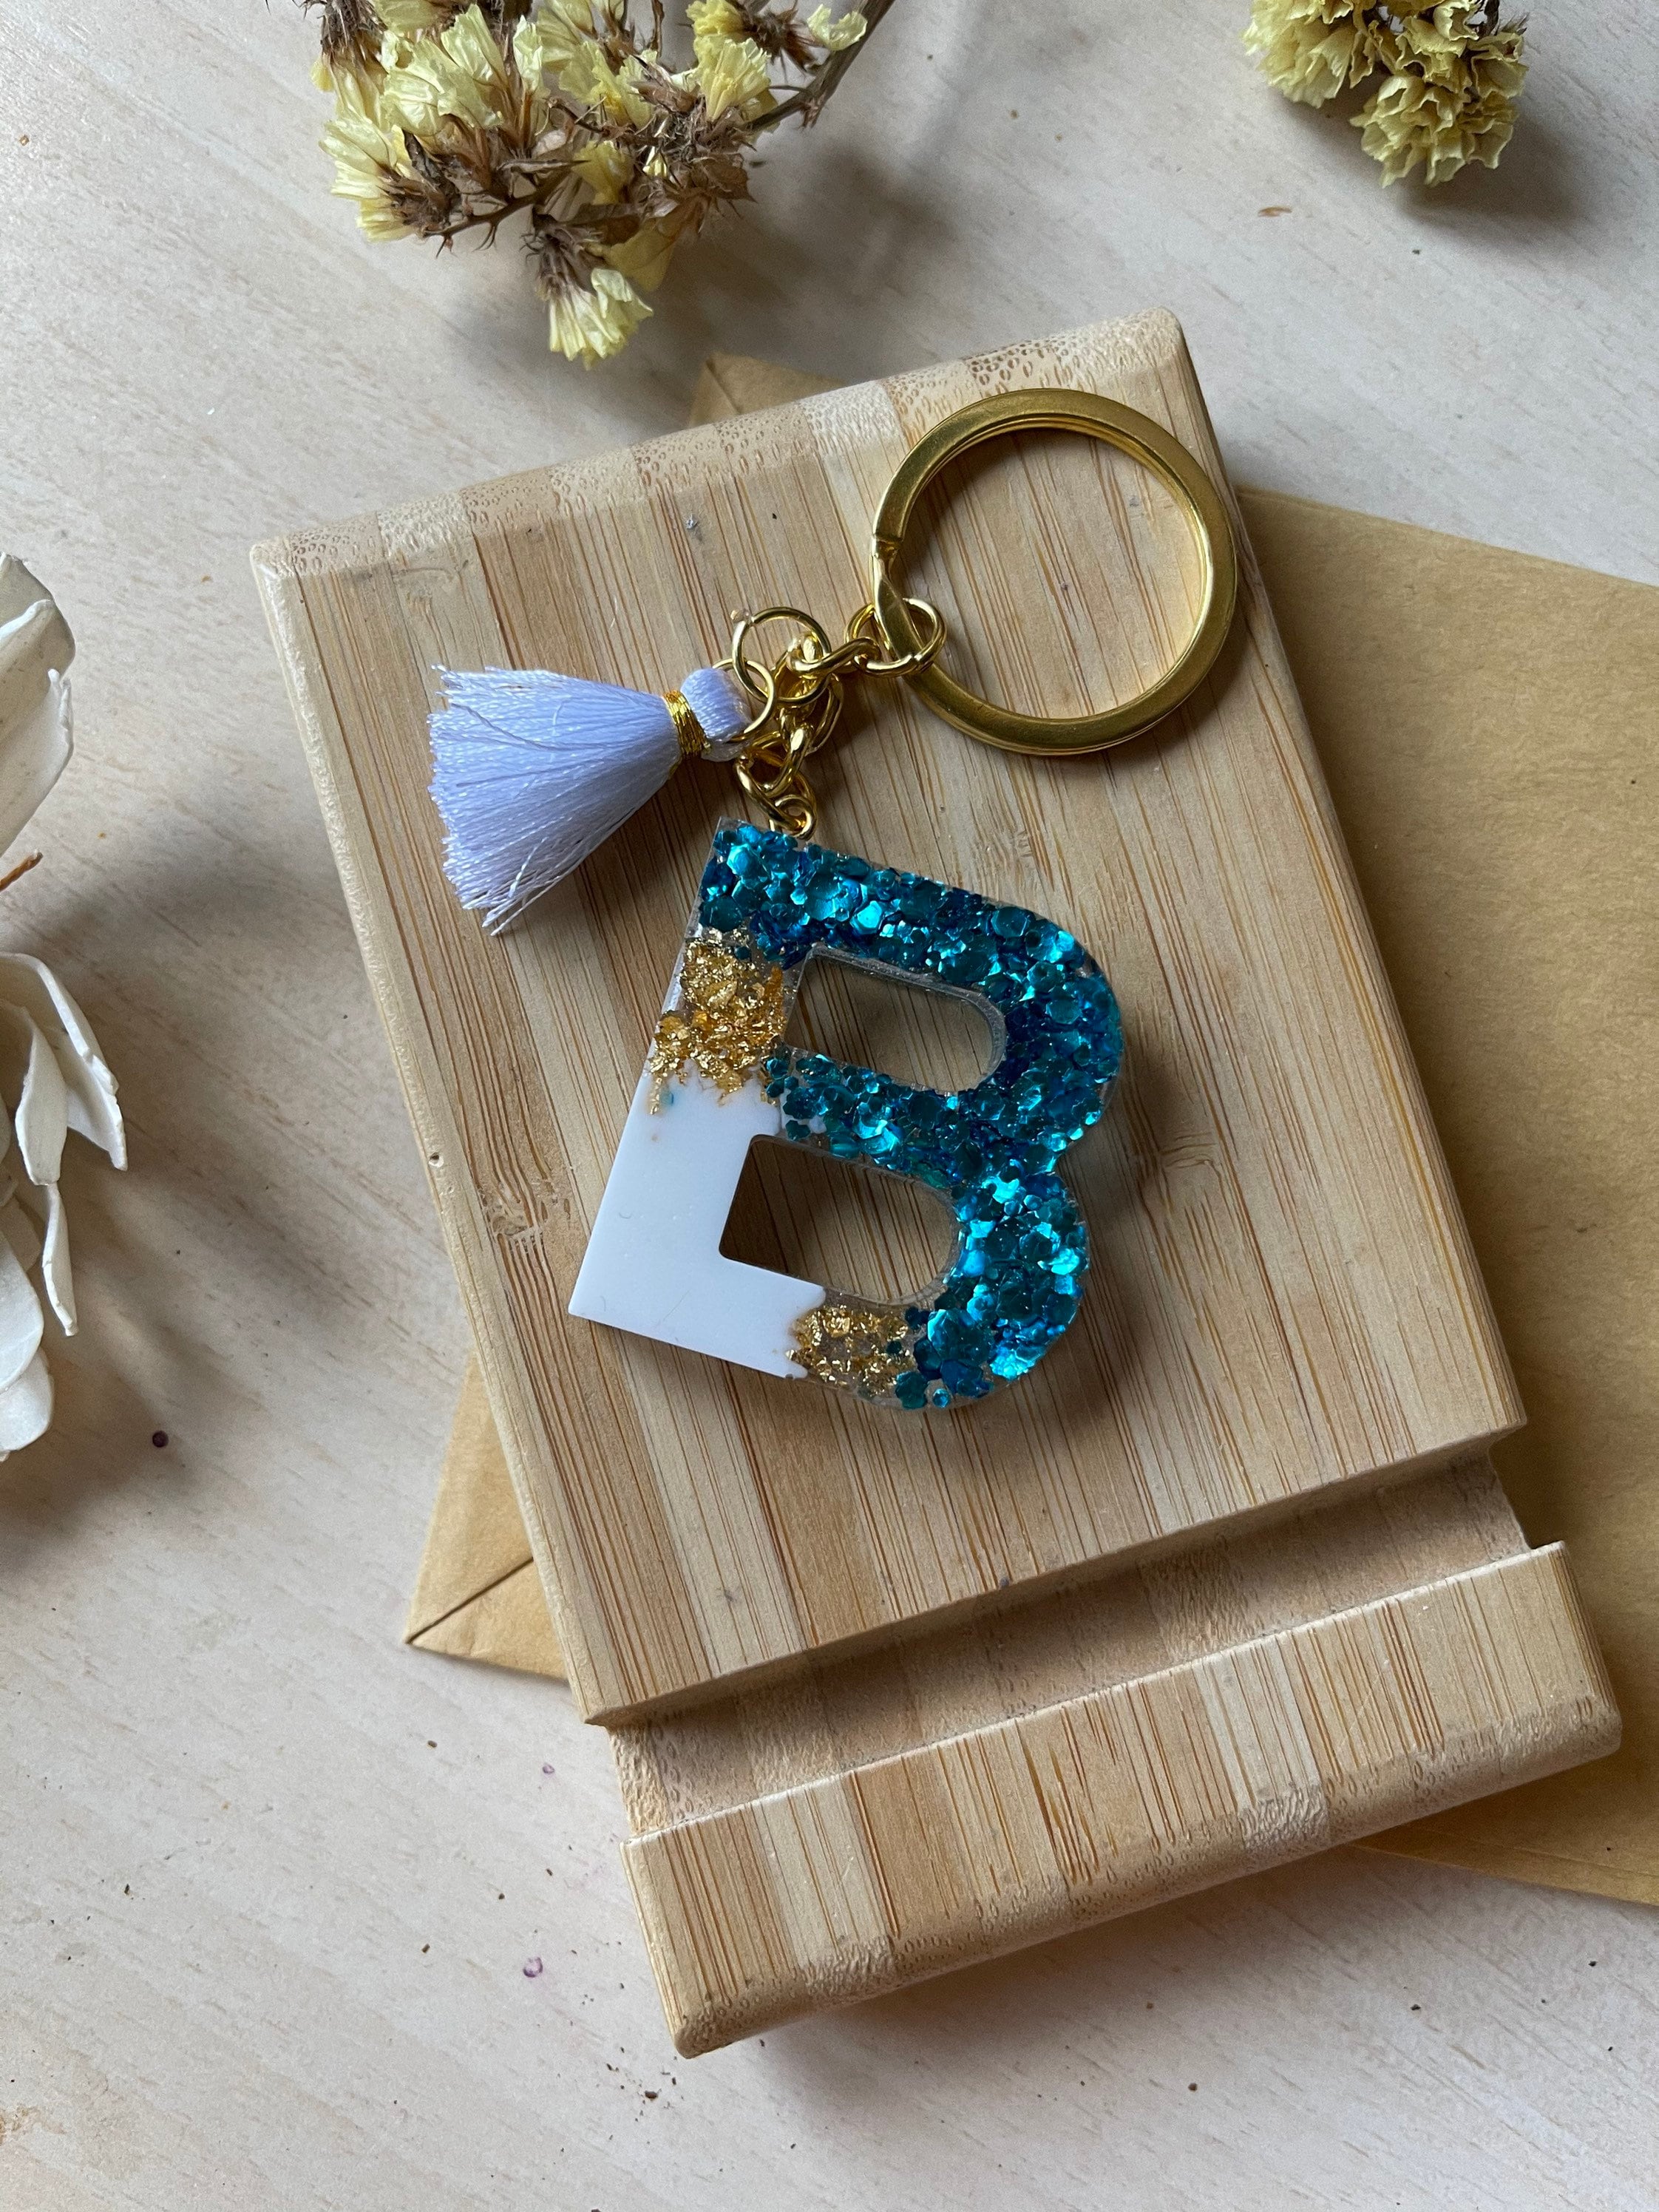 Crafty Angel Art G - Letter - Initial Resin Keychain Cloudy Clear Letter G and with A Ivory Tassel Dragon Fly Charm